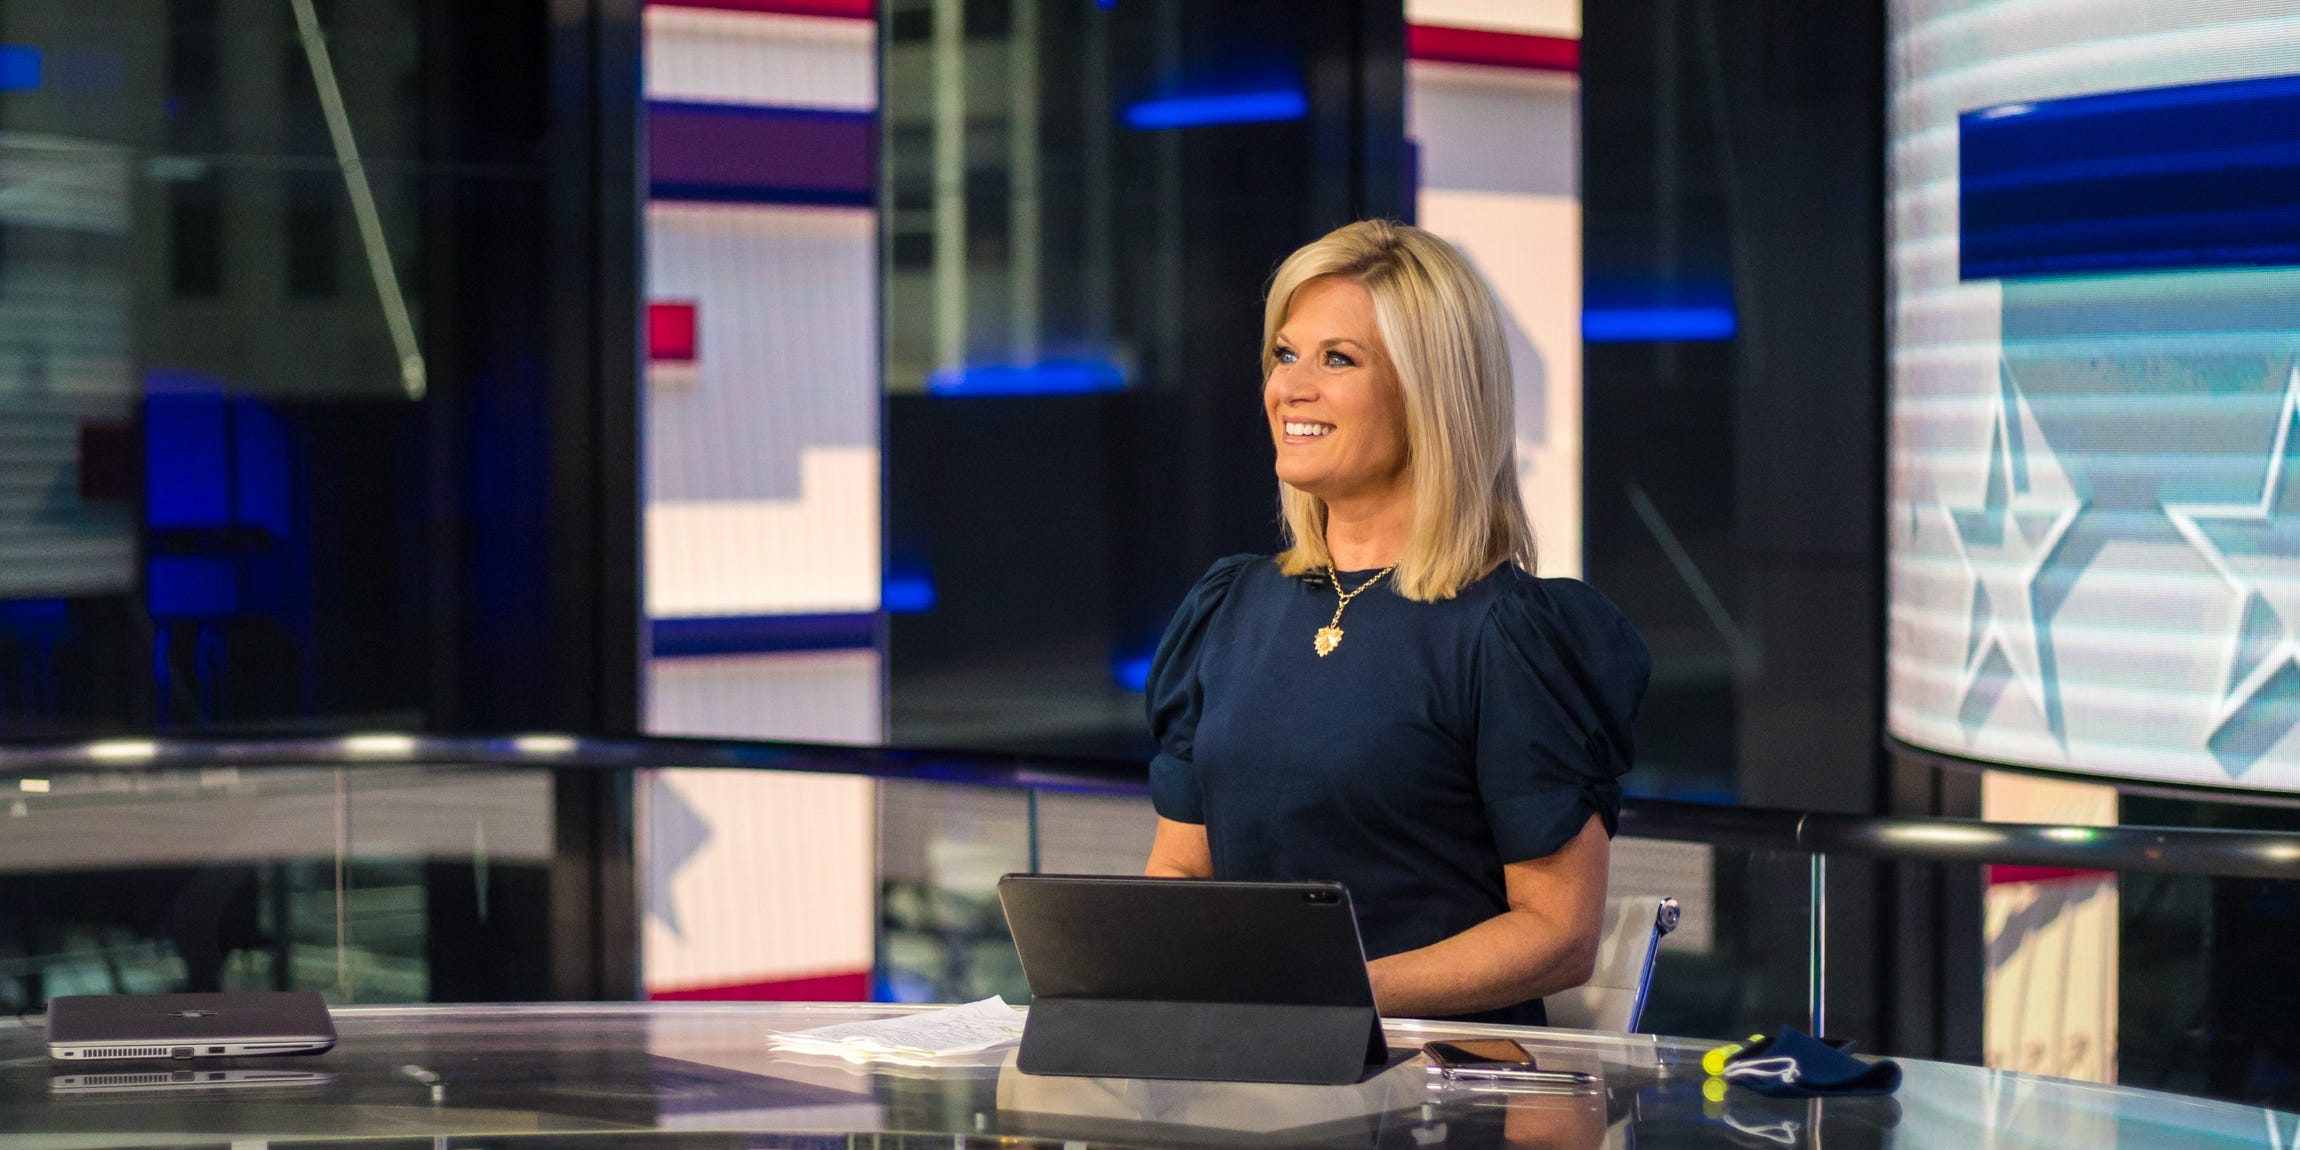 Fox News anchor Martha MacCallum on her daily routine and how she balances her personal life with being on TV every day